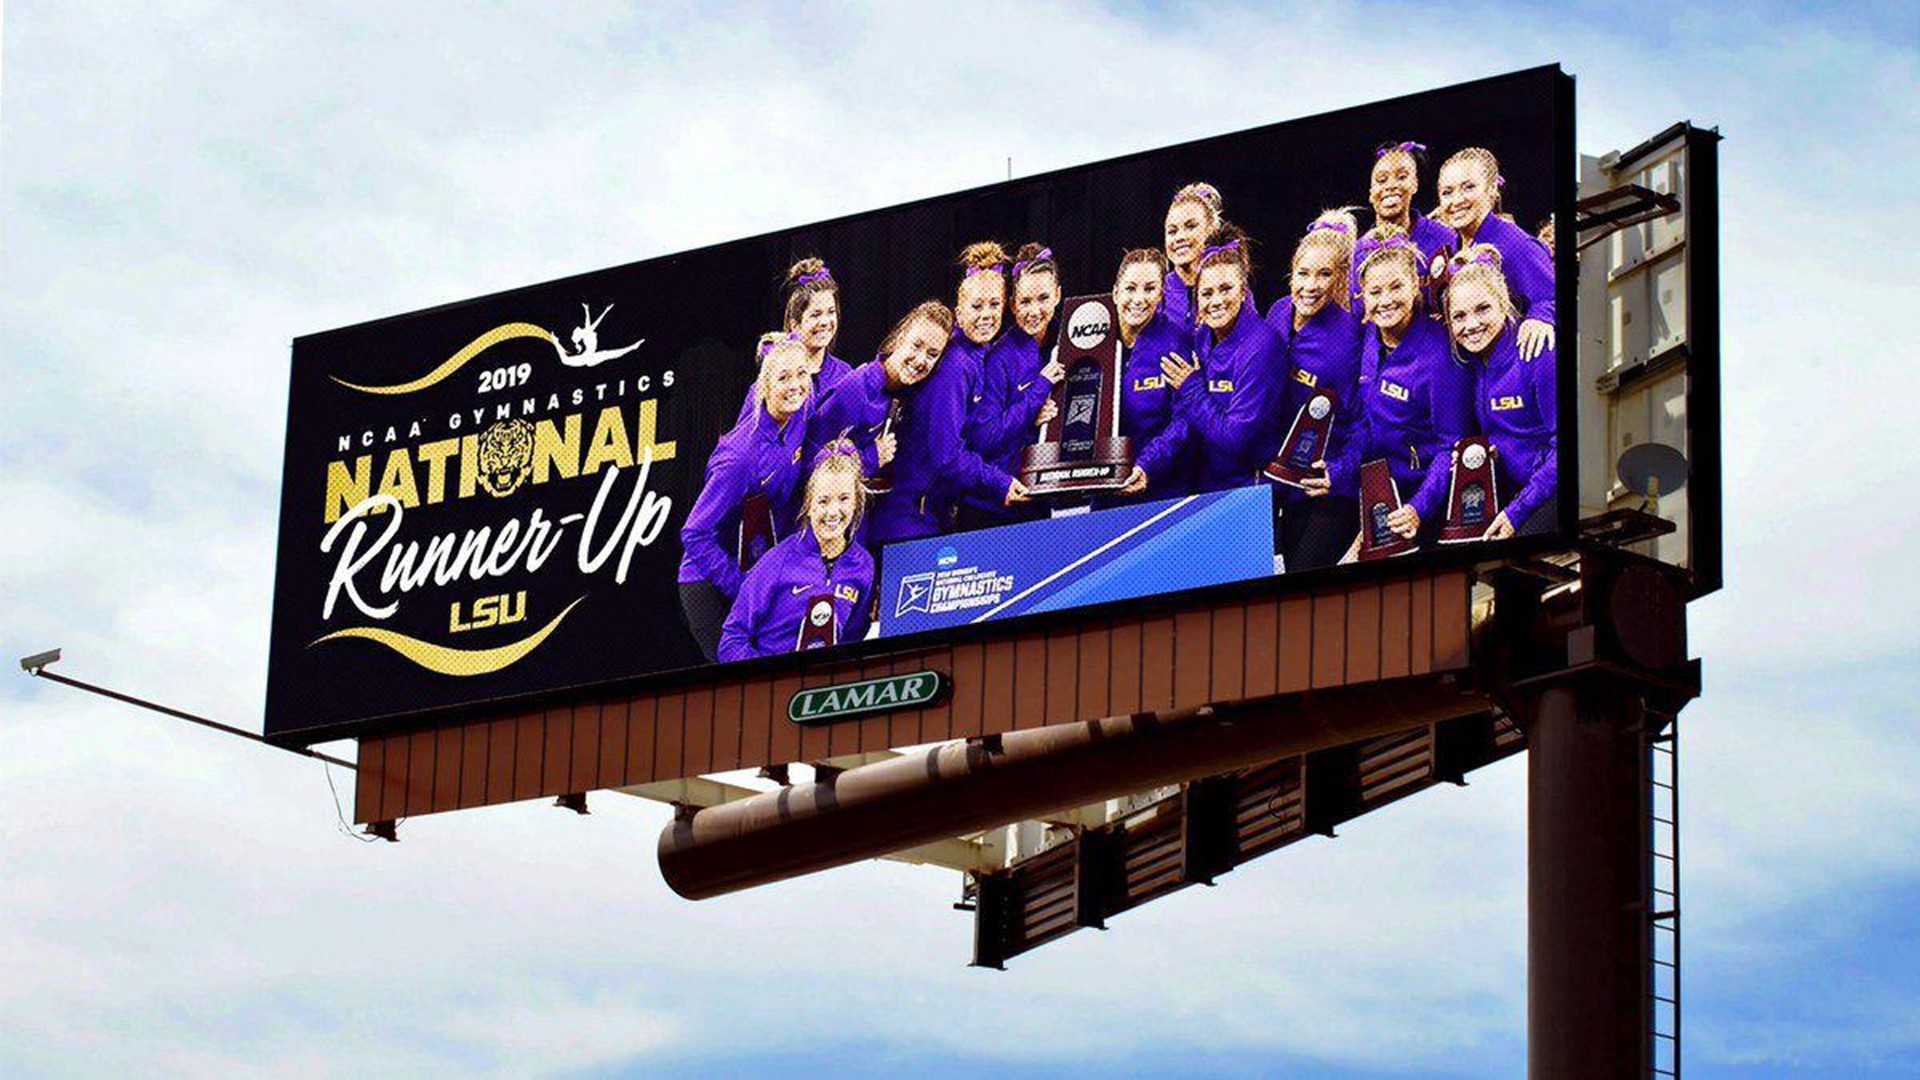 LSU's gymnastics team finished second nationally at the NCAA Championships Saturday night, and the school thanked them for the fine season with an electronic billboard message that sent one national sports writer into a tizzy.